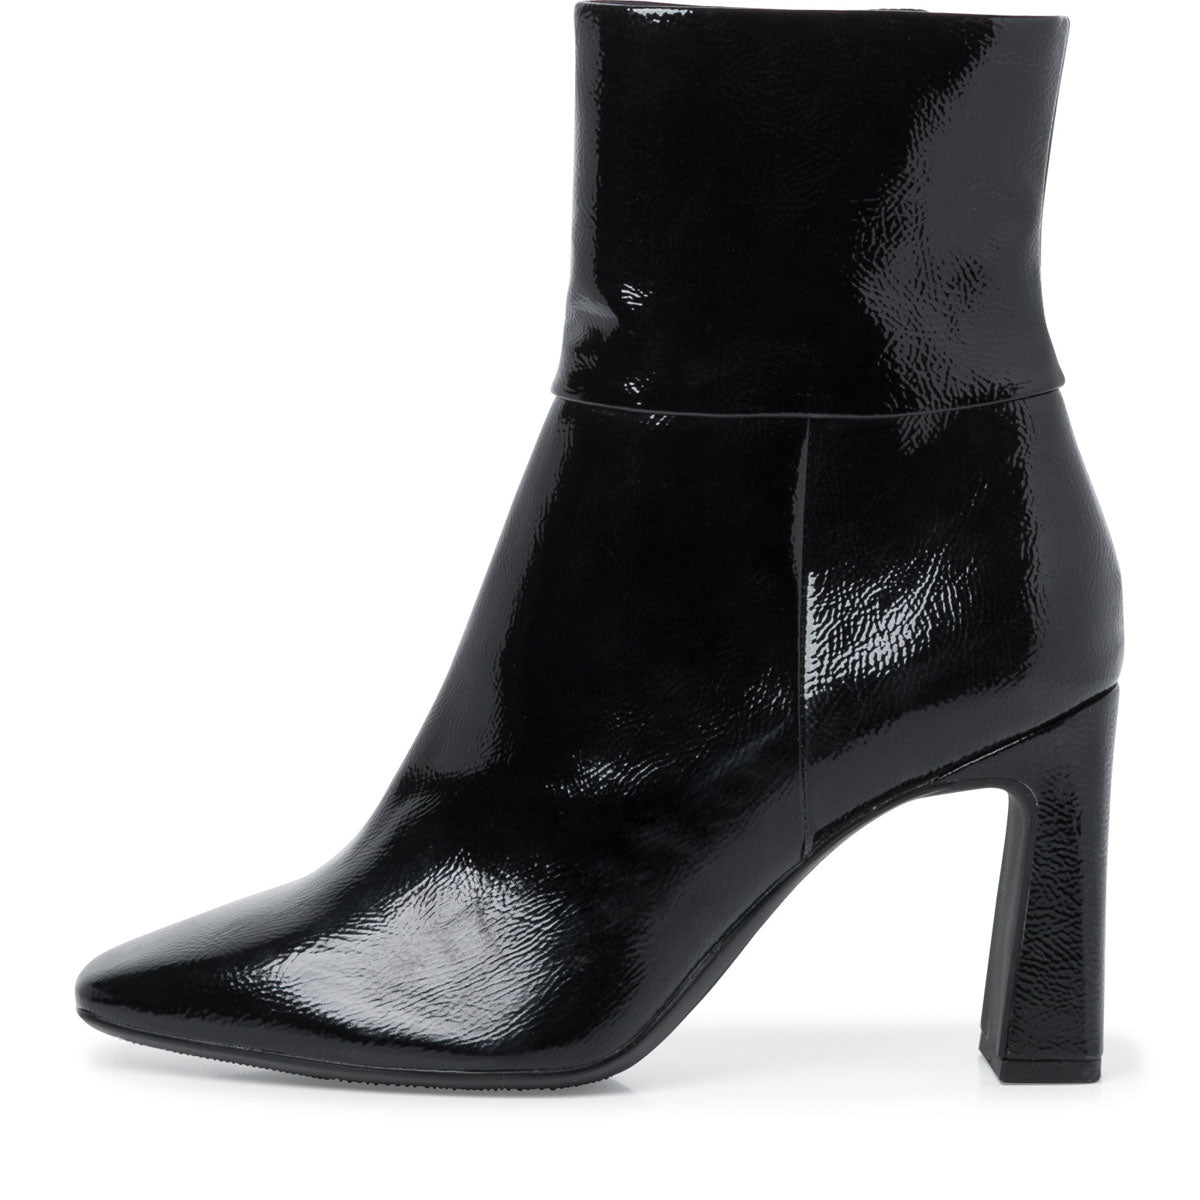 Front view of the Tamaris Staying Stylish High Heel Black Ankle Boots showcasing the glossy finish.